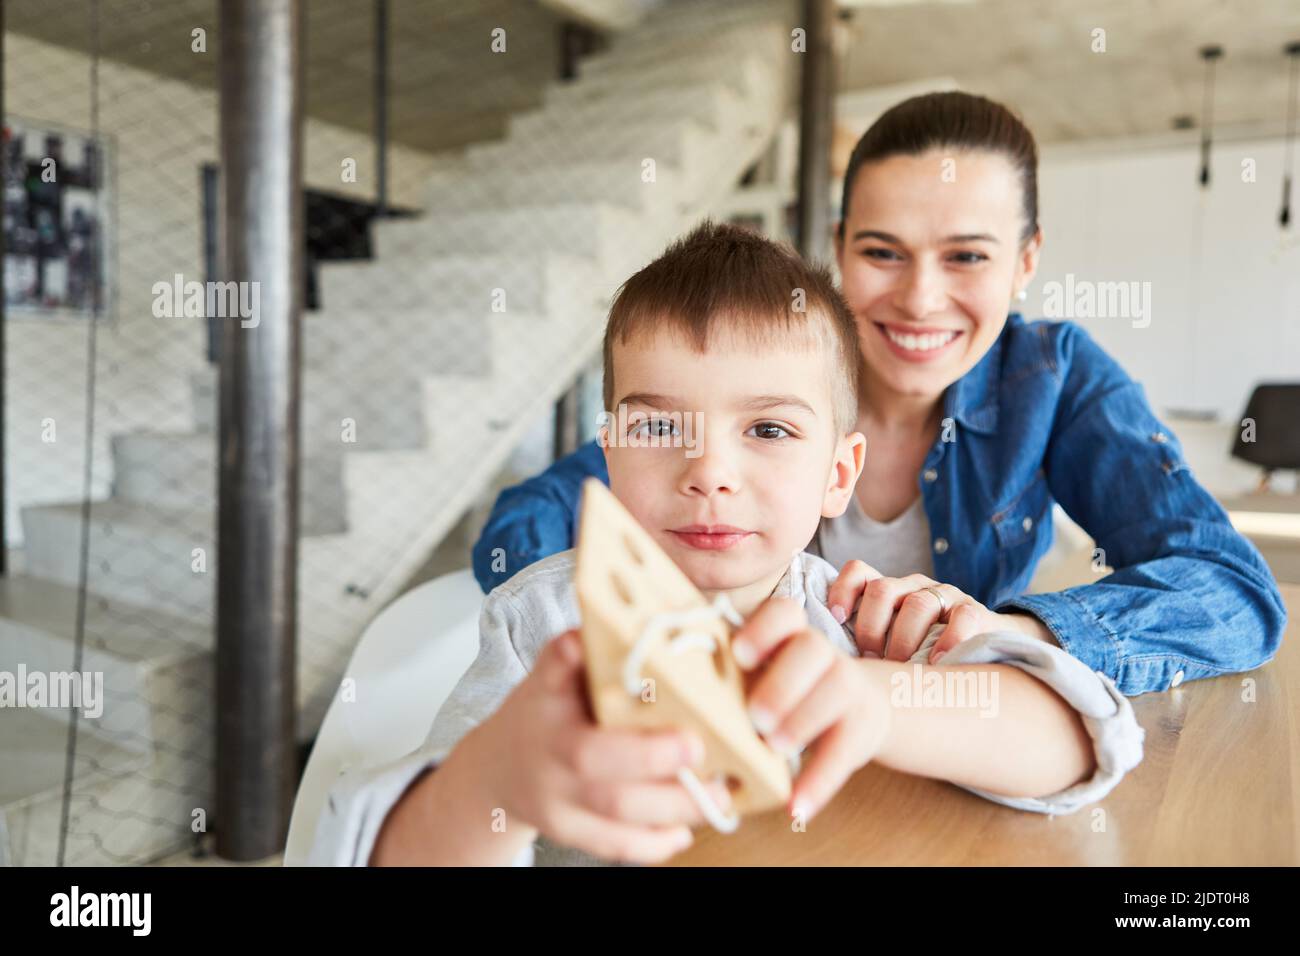 Child proudly displays a wooden threading block as a motor skills educational game with mother in the background Stock Photo